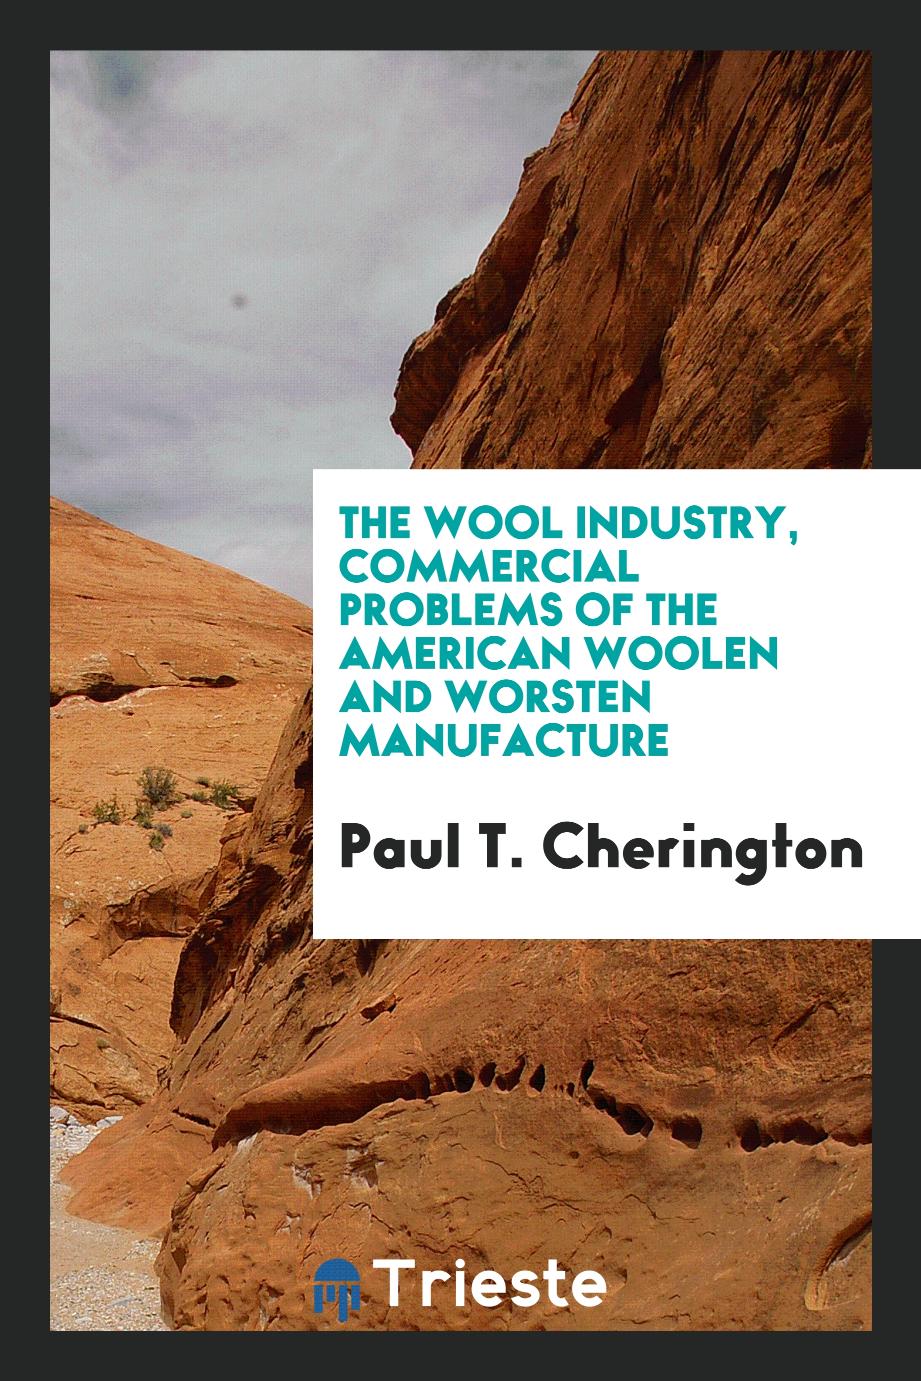 The wool industry, commercial problems of the American woolen and worsten manufacture